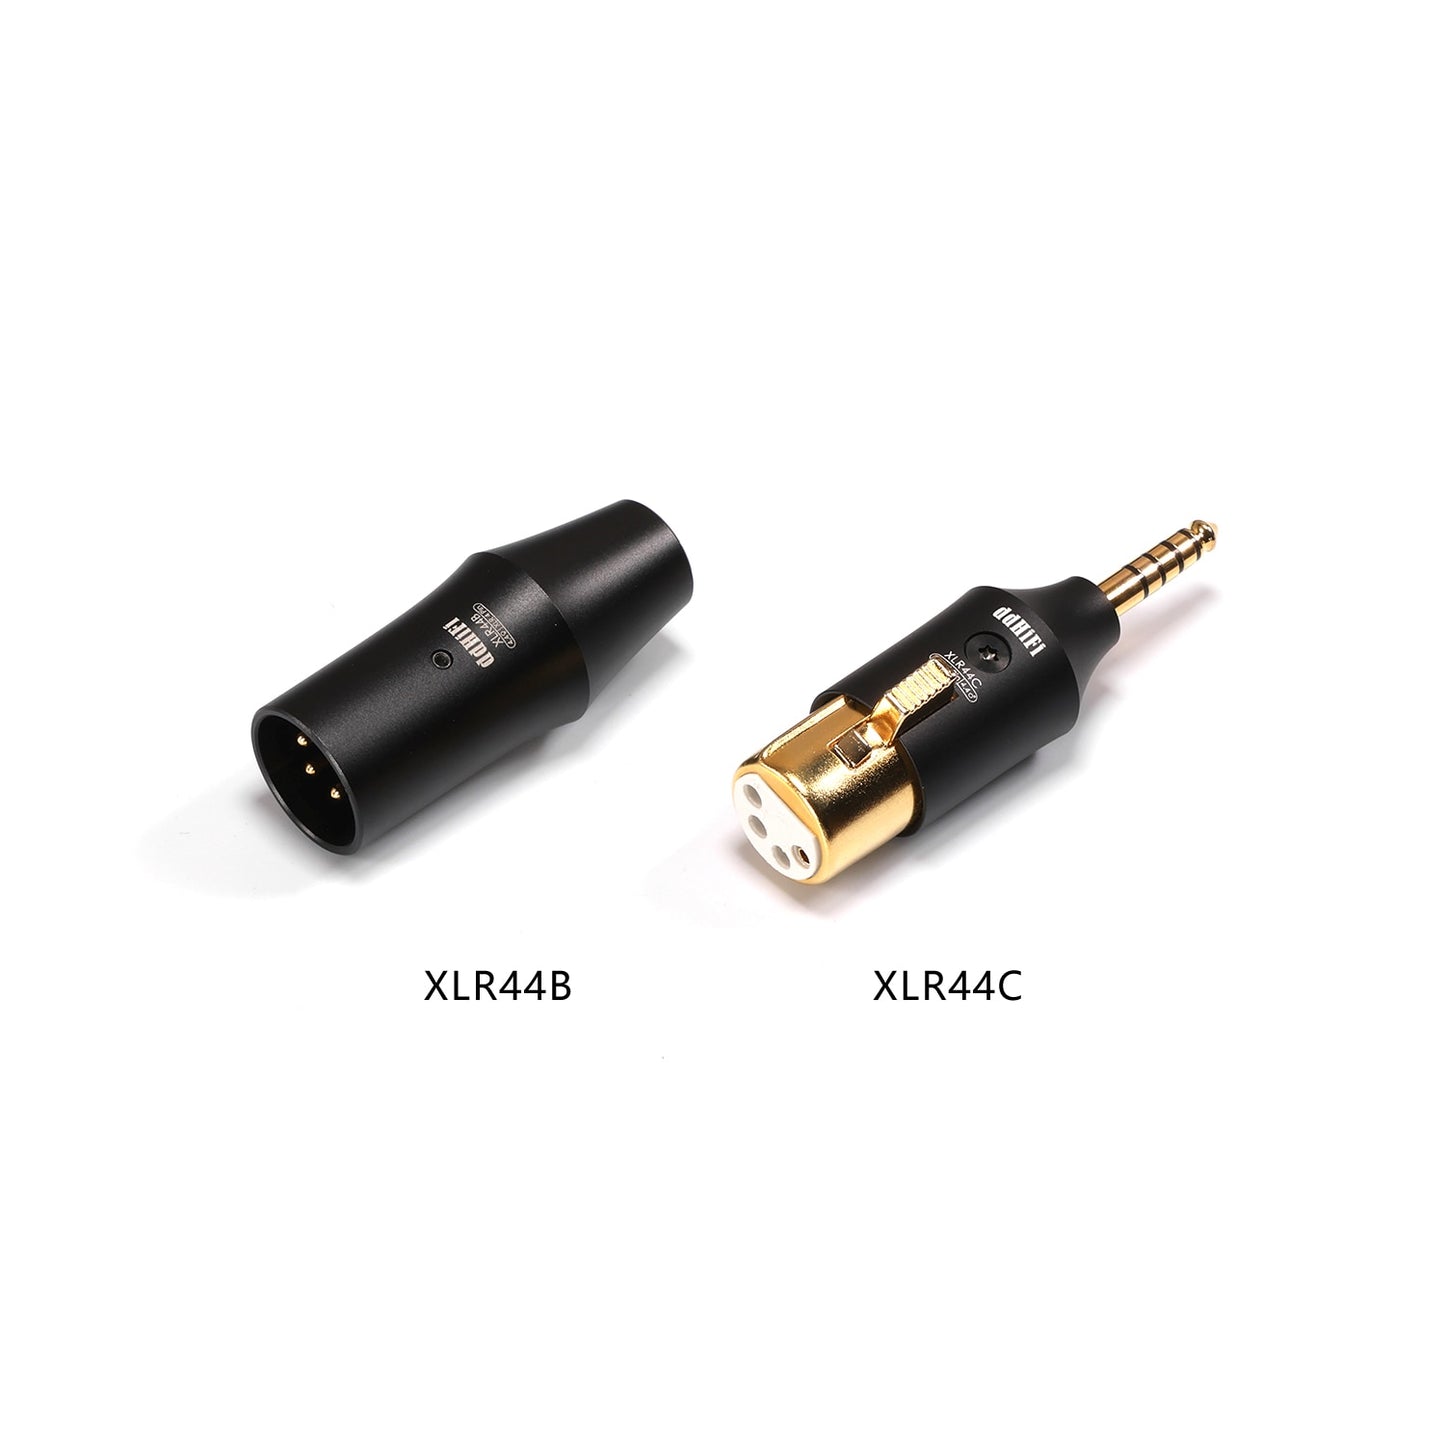 ddHiFi XLR44C Balanced XLR 4Pin to 4.4mm Adapter, Adapt Traditional XLR 4Pin Headphones Cables to 4.4mm Terminated Devices - The HiFi Cat